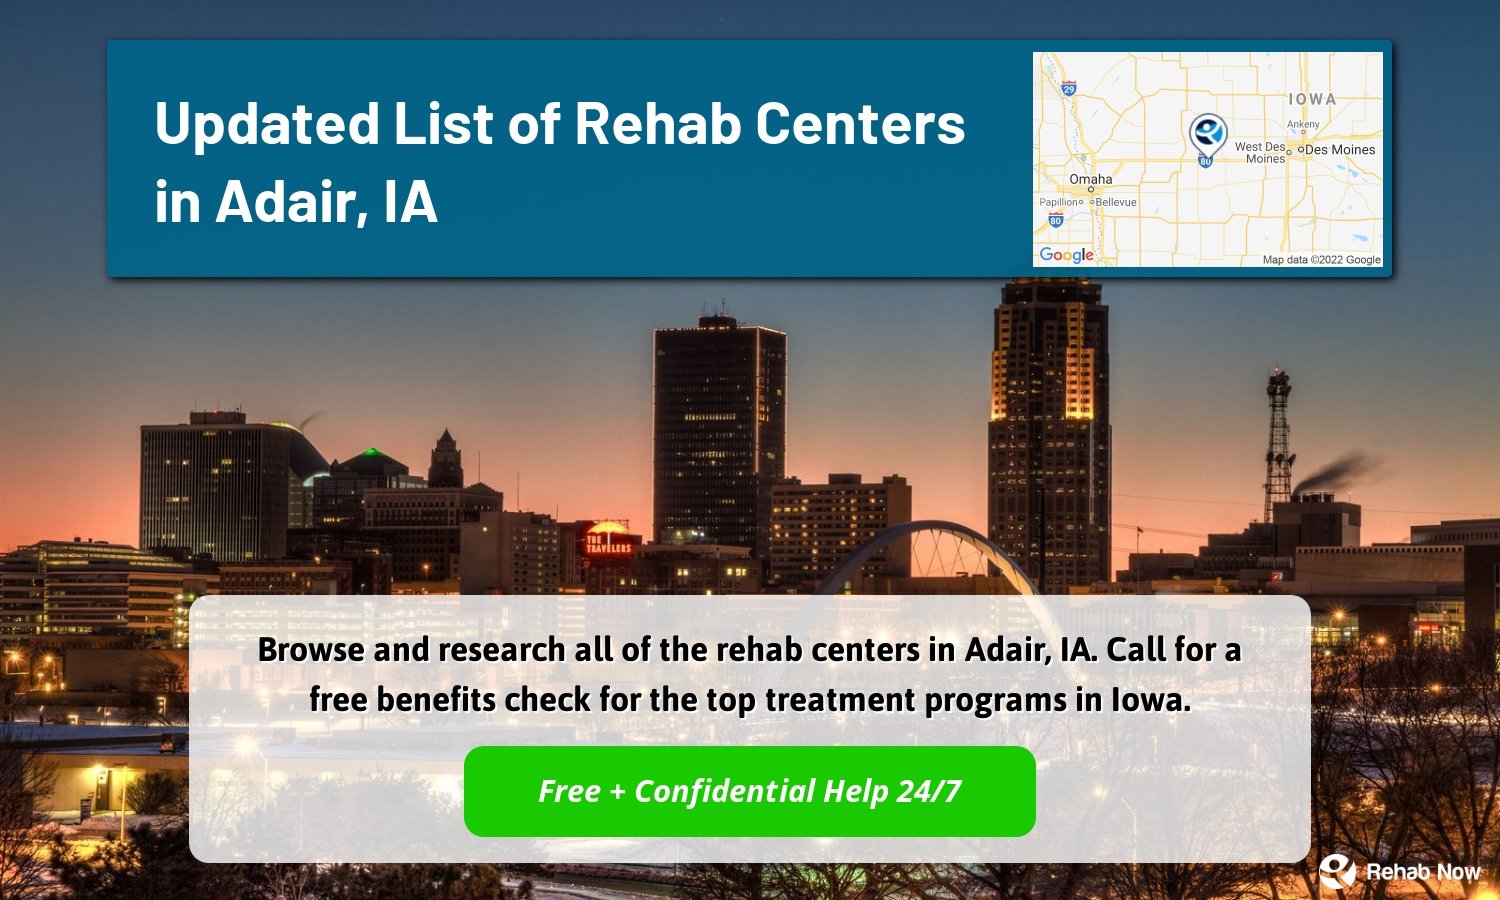 Browse and research all of the rehab centers in Adair, IA. Call for a free benefits check for the top treatment programs in Iowa.